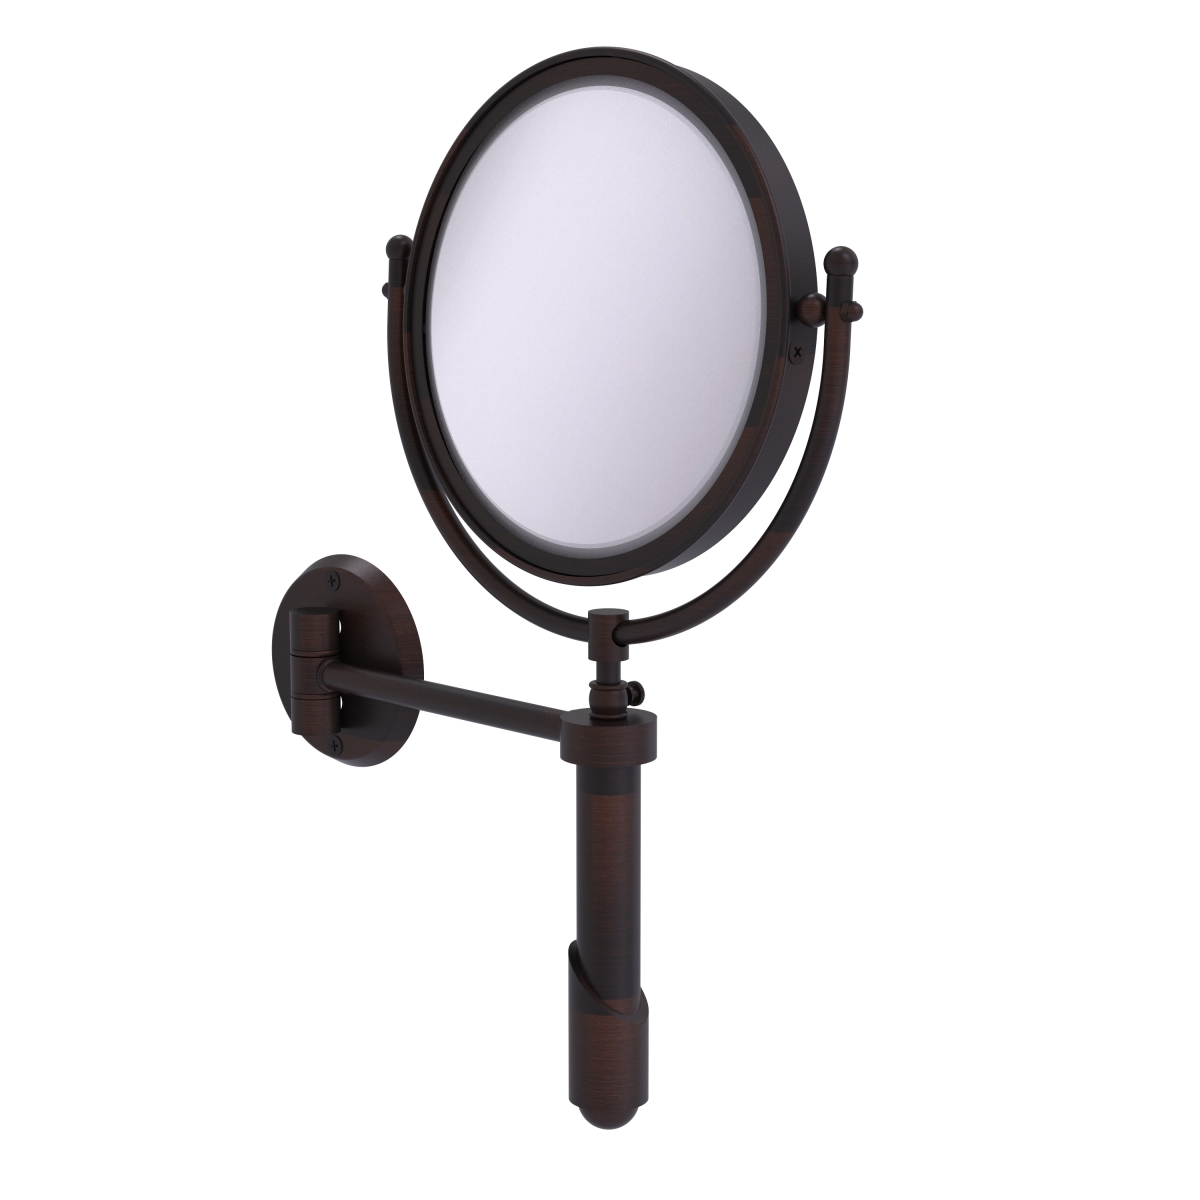 SHM-8-2X-VB 8 in. dia. Soho Collection Wall Mounted Make-Up Mirror with 2X Magnification, Venetian Bronze -  Allied Brass, SHM-8/2X-VB